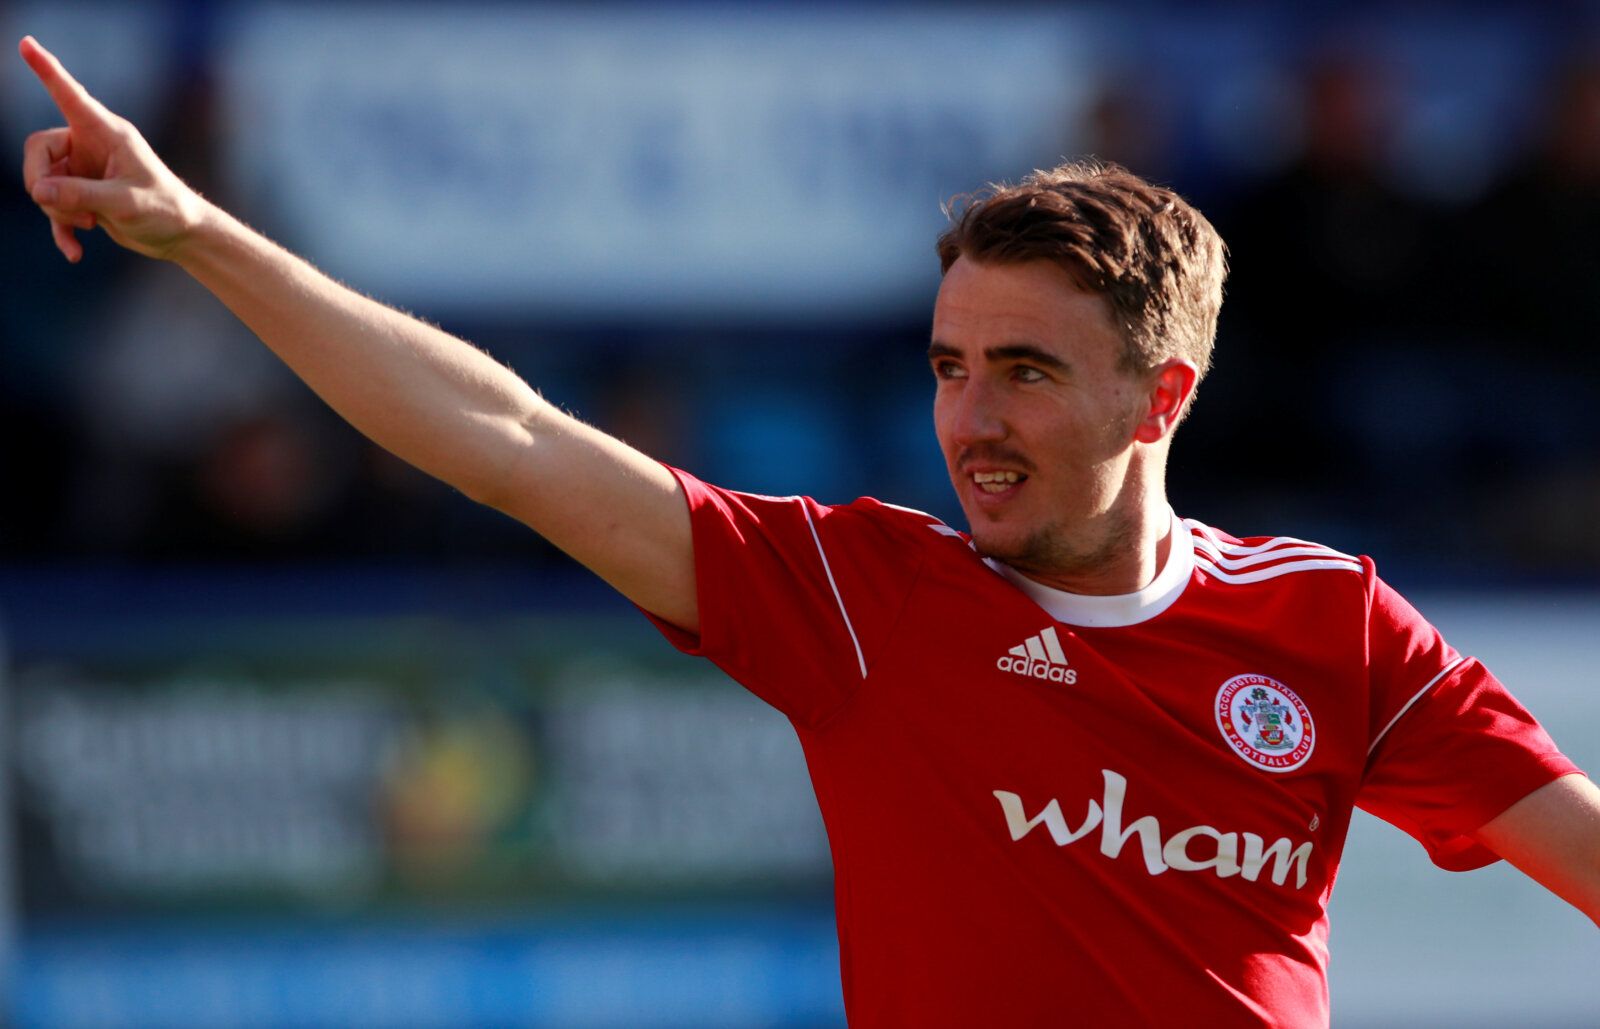 Soccer Football - League One - Portsmouth v Accrington Stanley - Fratton Park, Portsmouth, Britain - May 4, 2019   Accrington Stanley's Sean McConville celebrates scoring their first goal   Action Images/Andrew Couldridge    EDITORIAL USE ONLY. No use with unauthorized audio, video, data, fixture lists, club/league logos or 